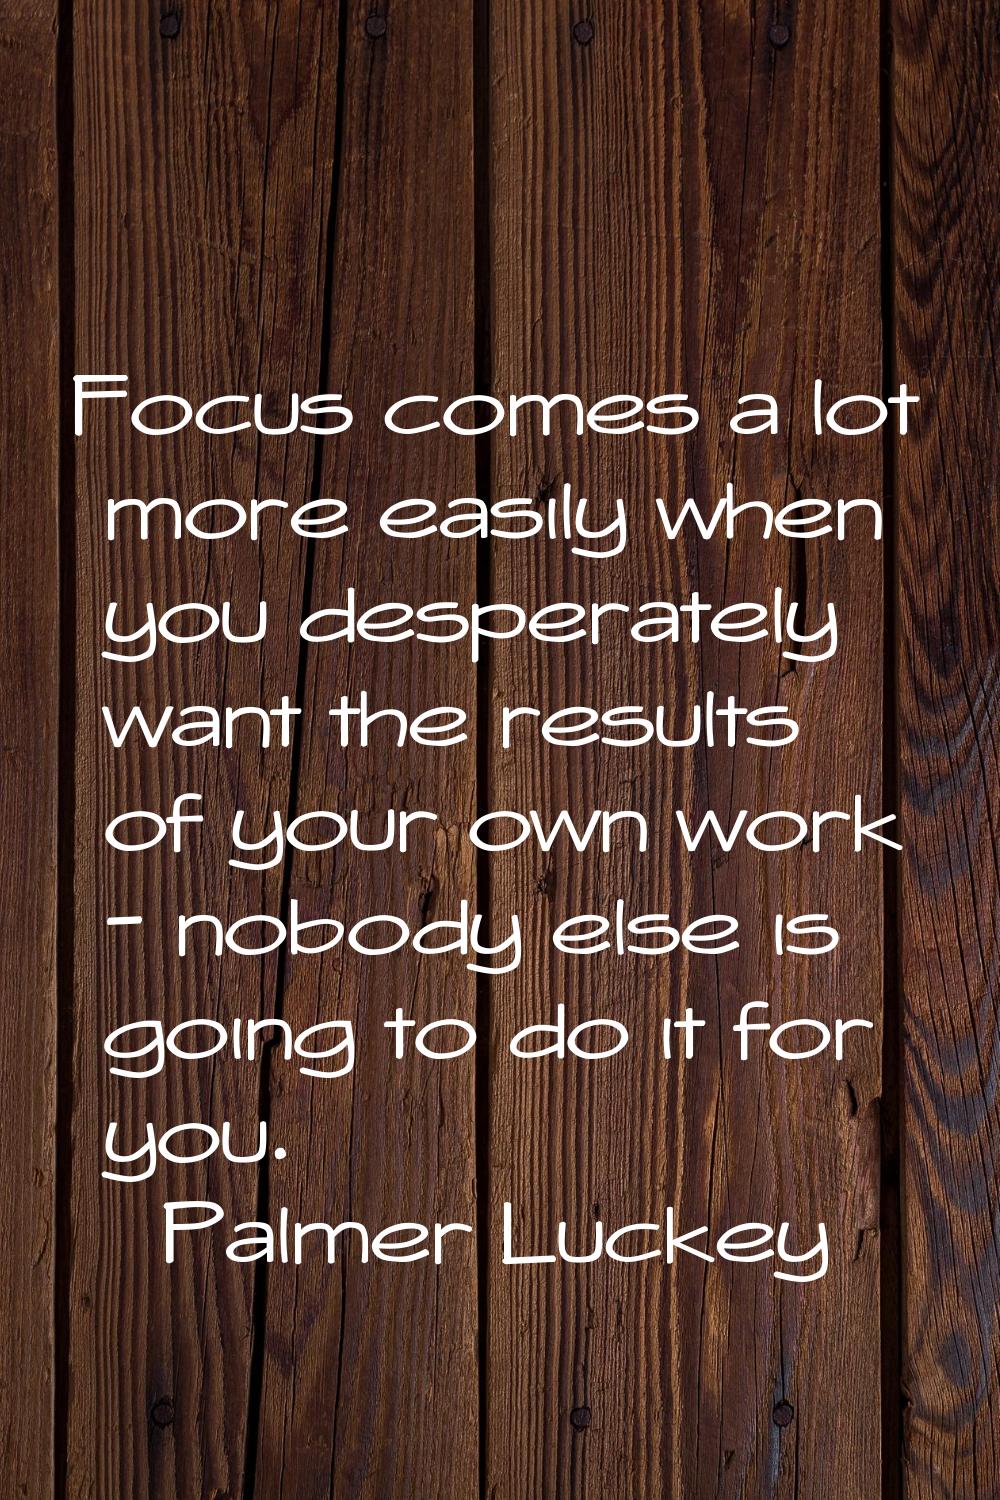 Focus comes a lot more easily when you desperately want the results of your own work - nobody else 